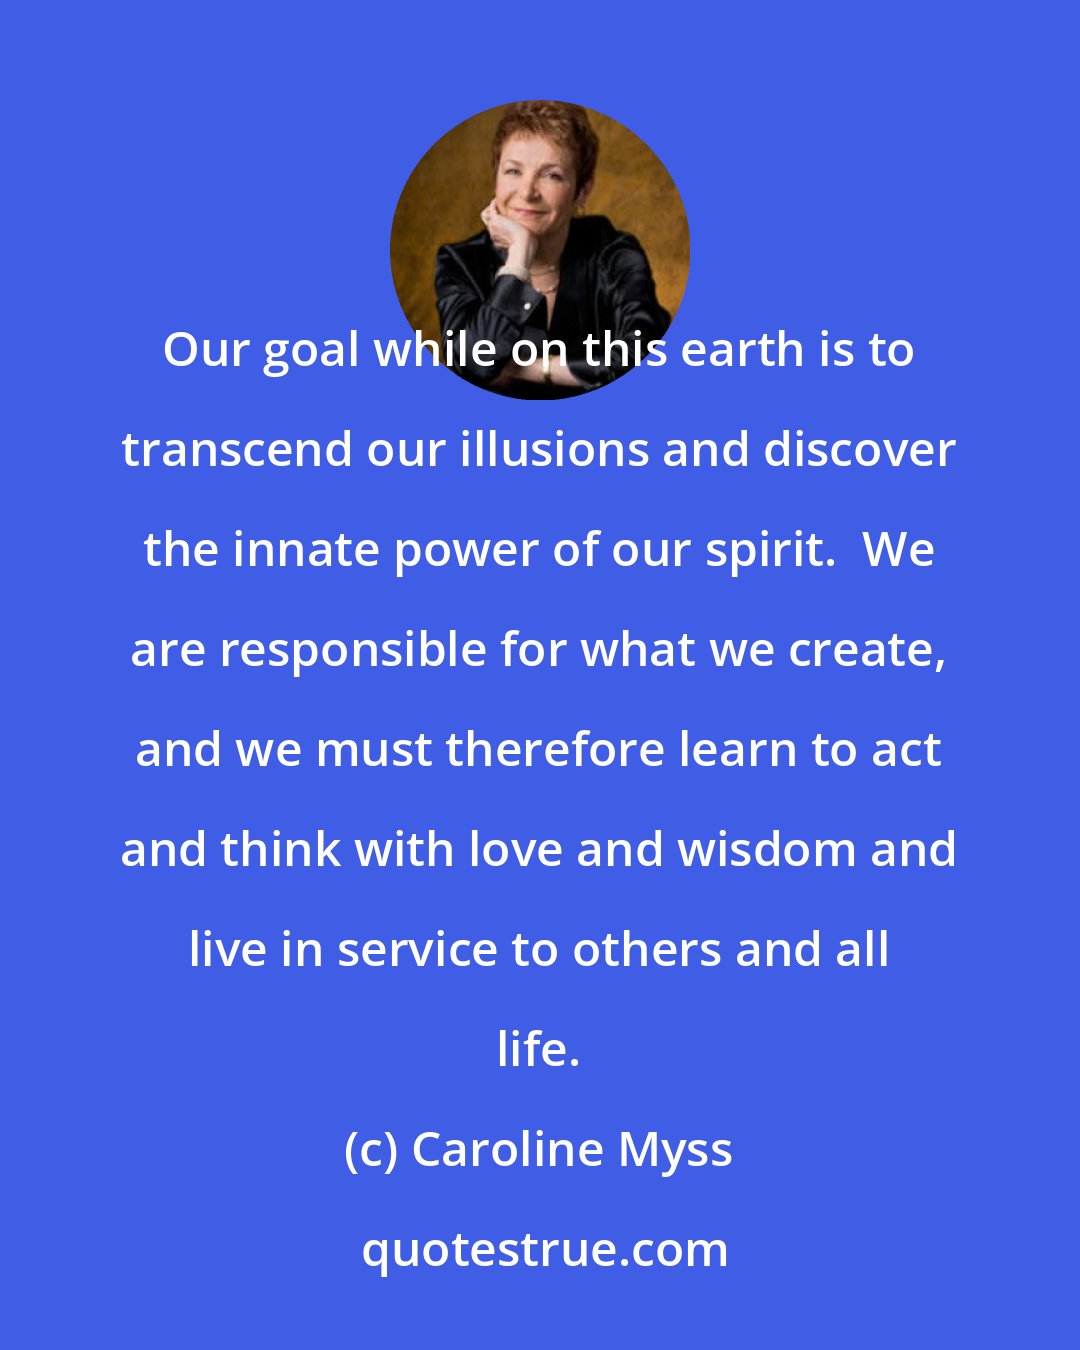 Caroline Myss: Our goal while on this earth is to transcend our illusions and discover the innate power of our spirit.  We are responsible for what we create, and we must therefore learn to act and think with love and wisdom and live in service to others and all life.